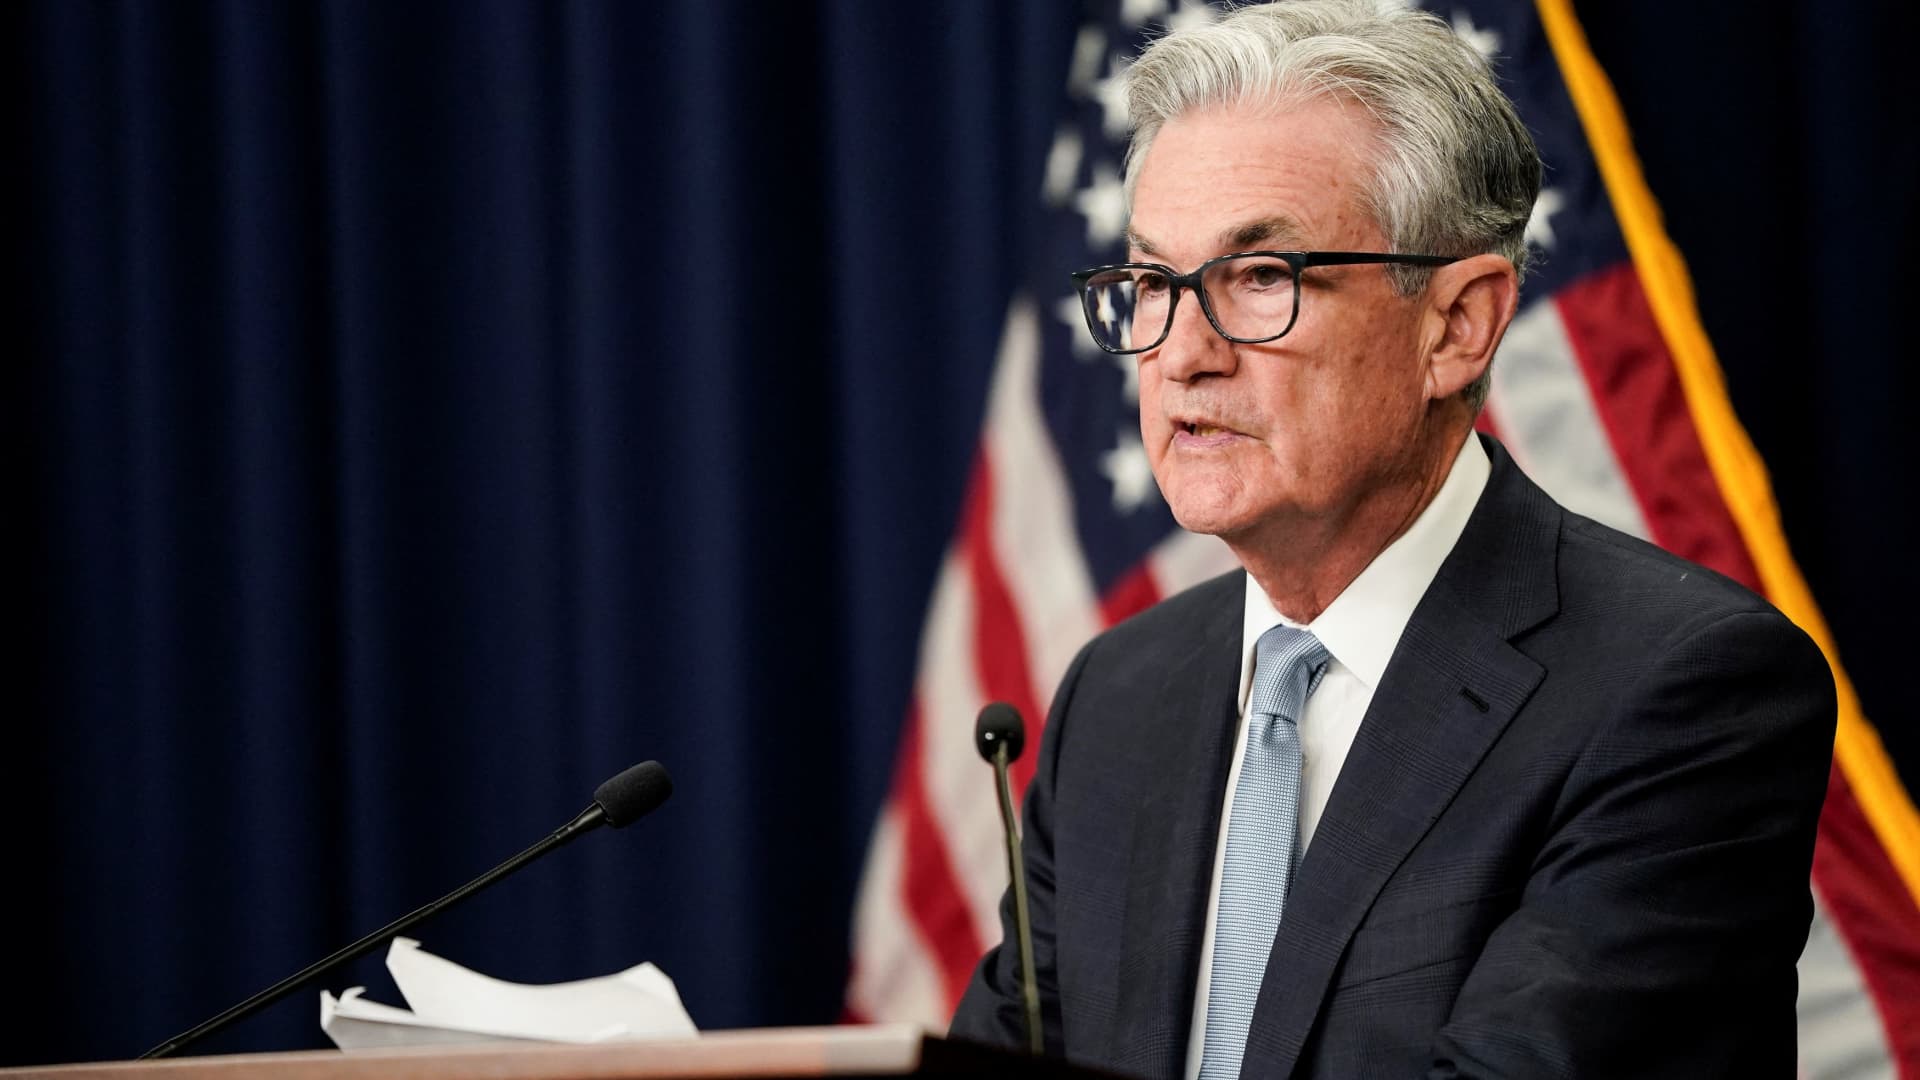 Powell, Clarida cleared of wrongdoing in Fed trading controversy